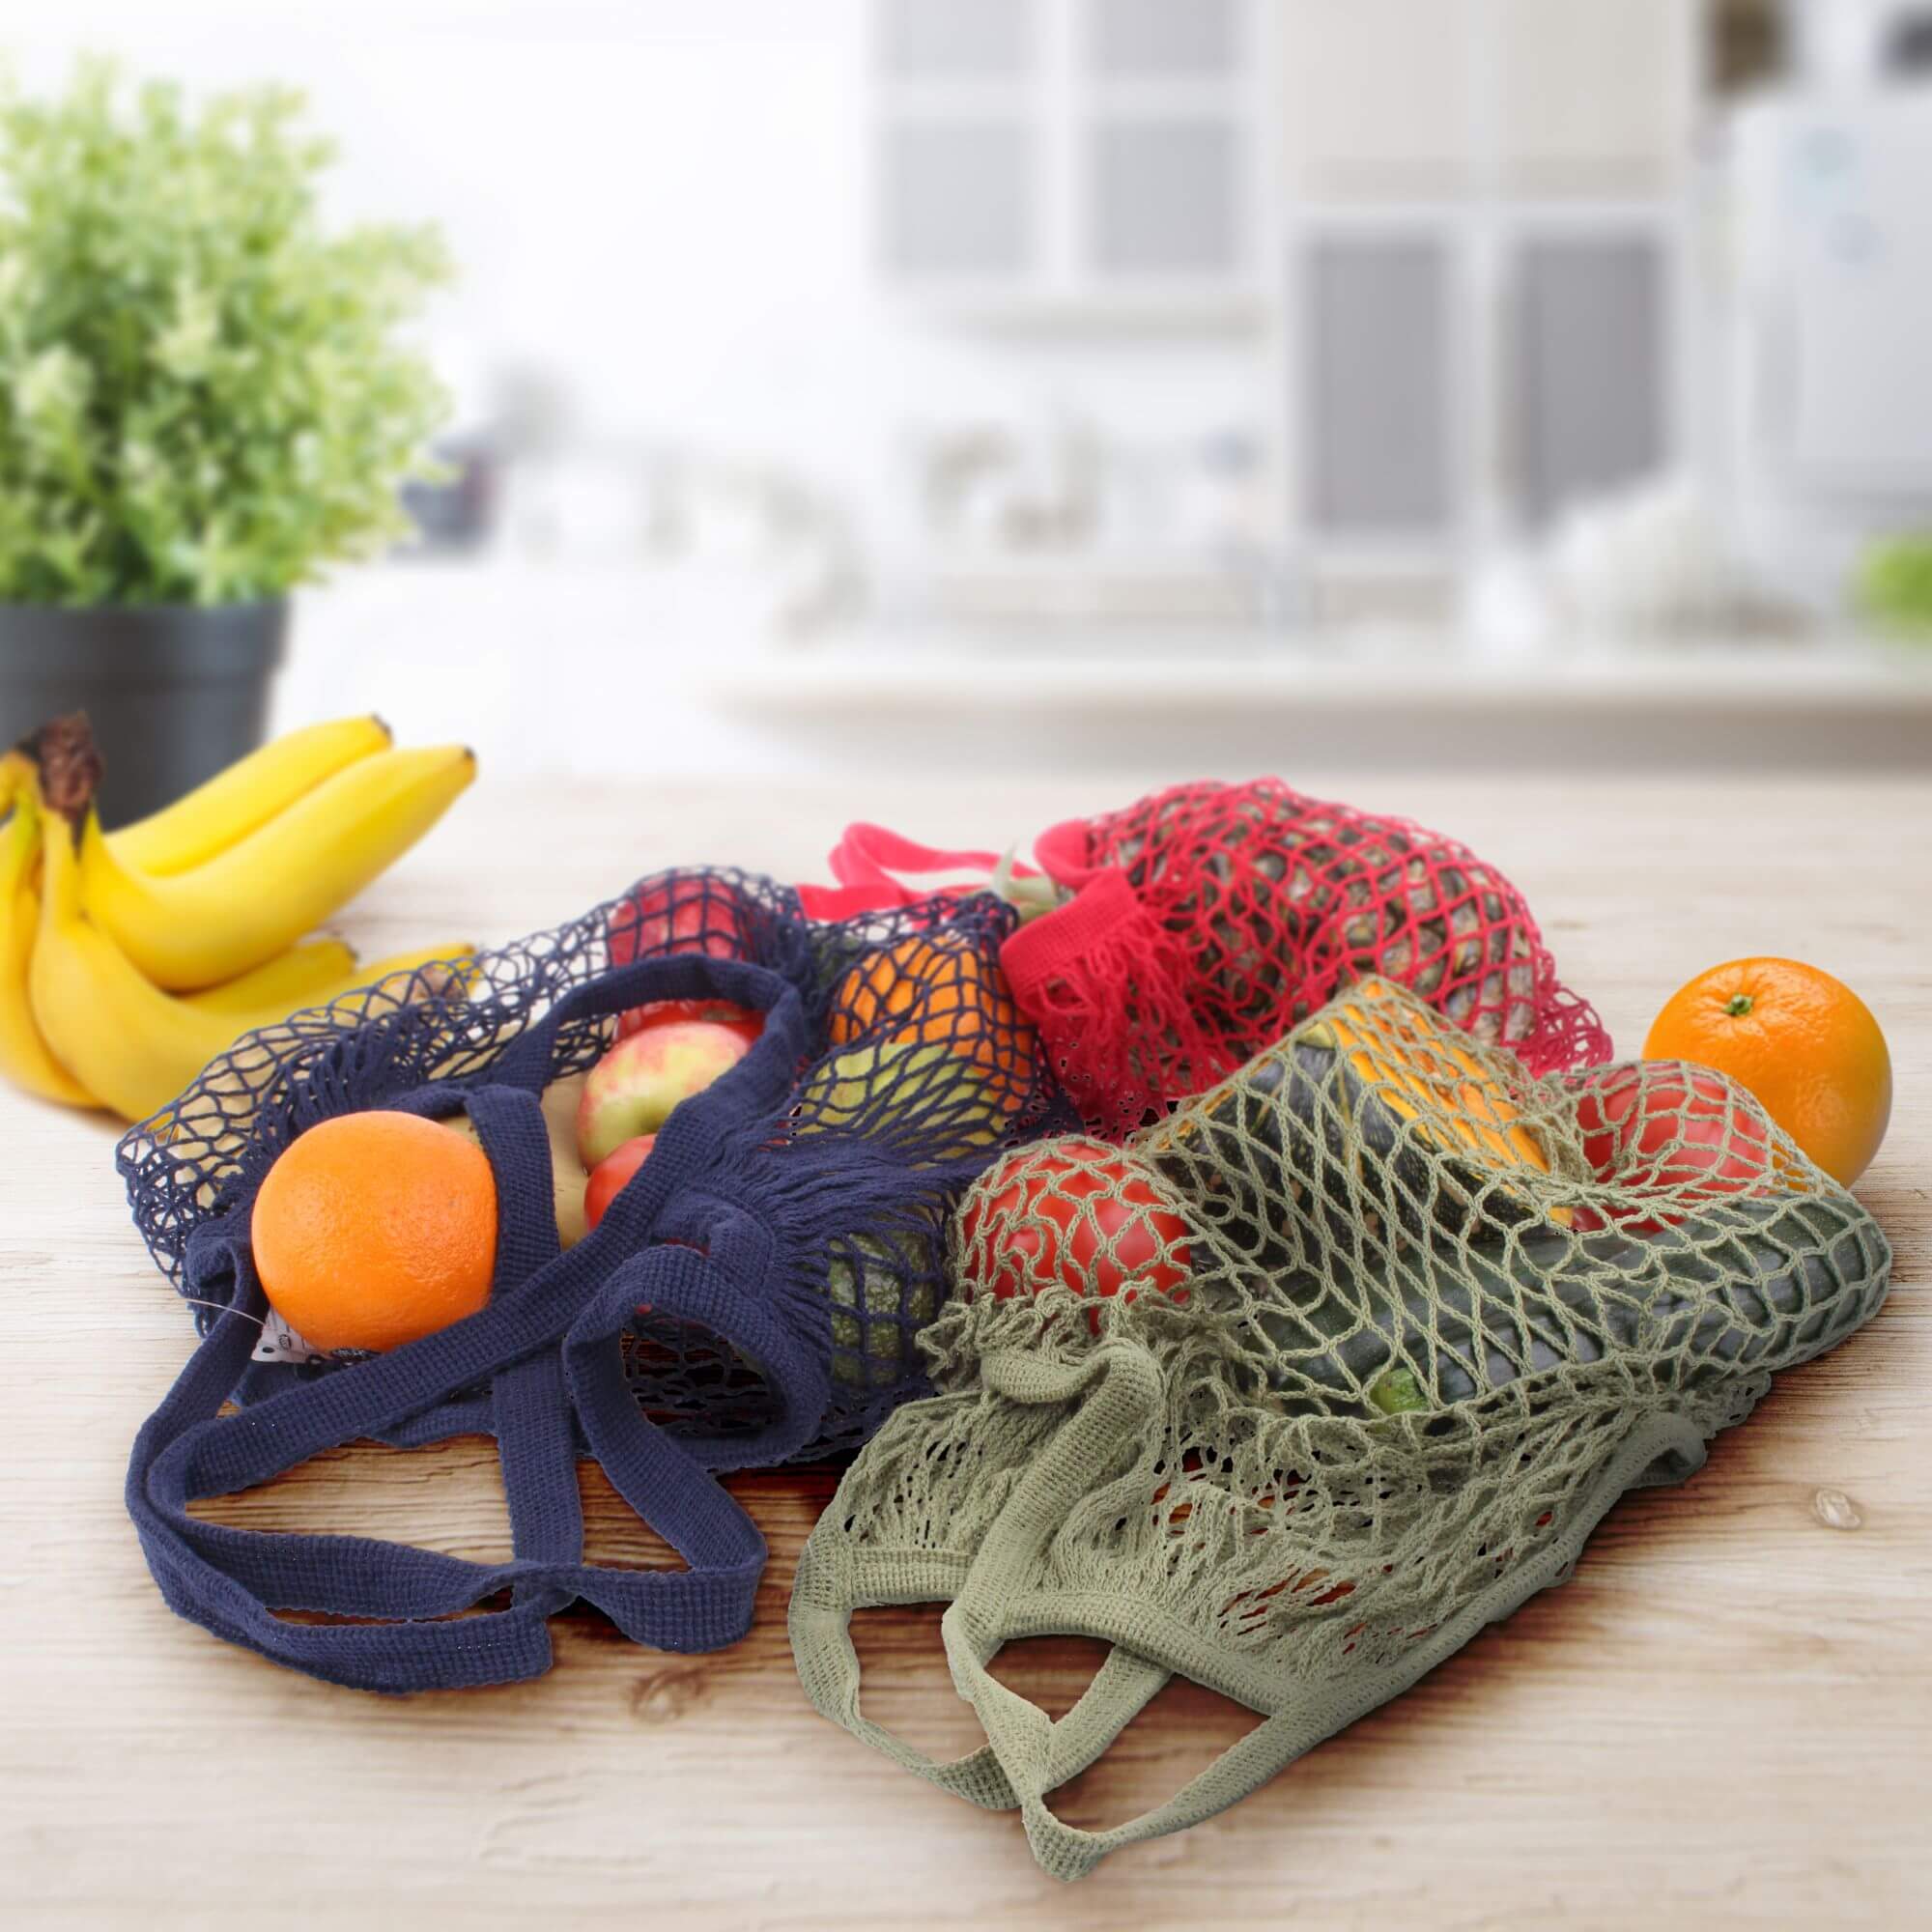 Reusable shopping bags on a kitchen bench with groceries inside